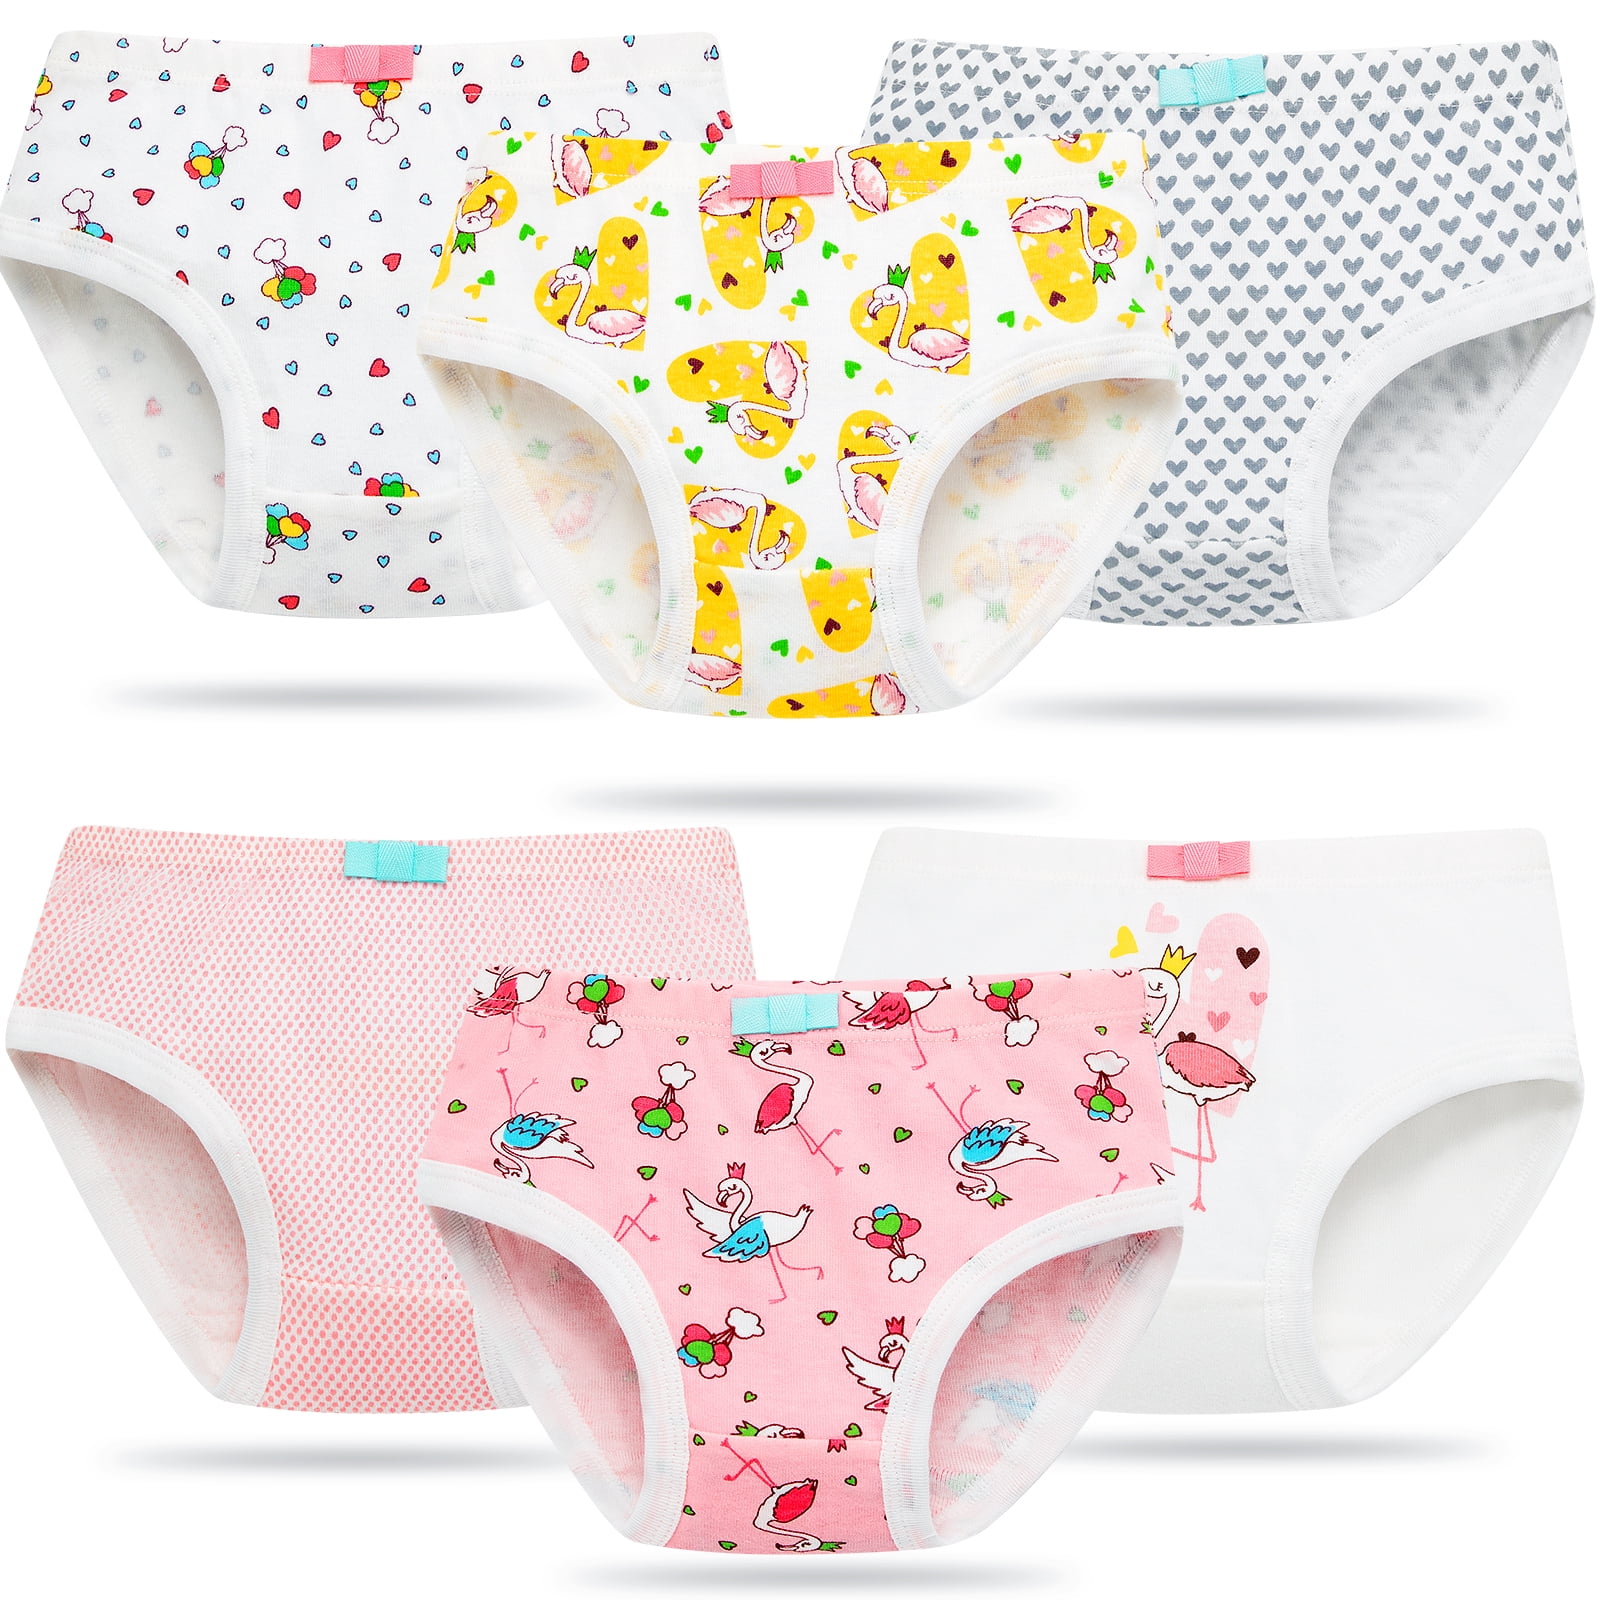  Winging Day Little Girls 100% Cotton Panties Easter